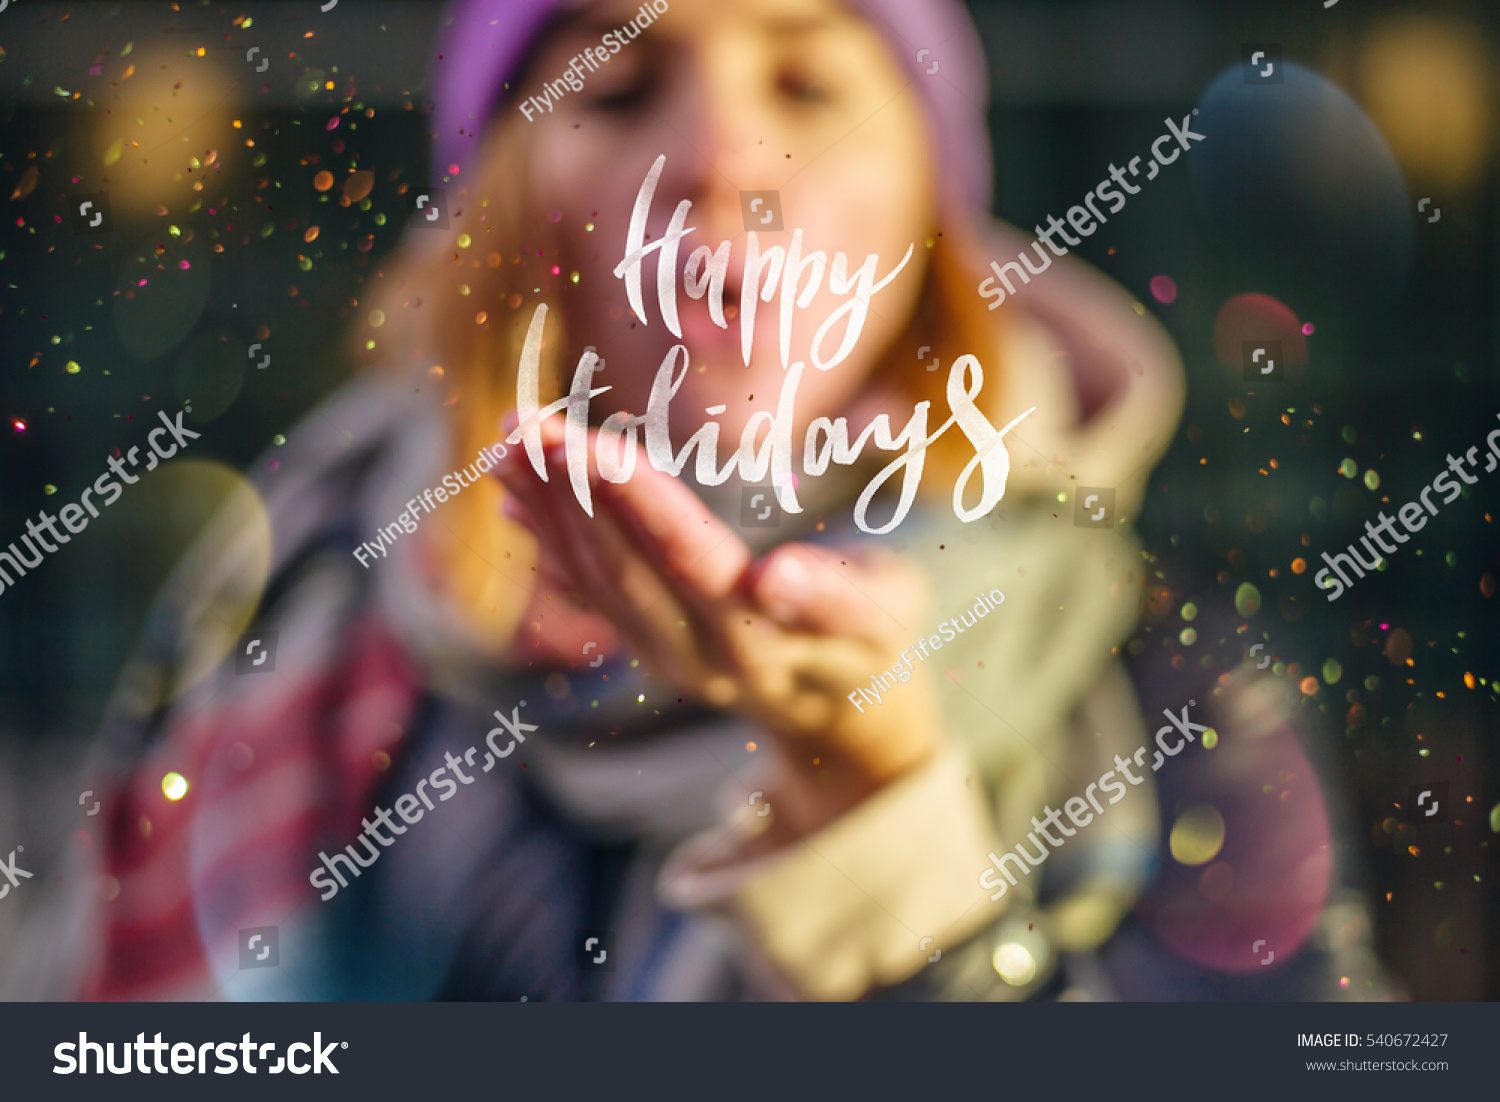 Young beautiful girl holding lettering "Happy Holidays", Young girl wearing at cozy scarf blowing a burst of magic glitter, Christmas magic time. #540672427